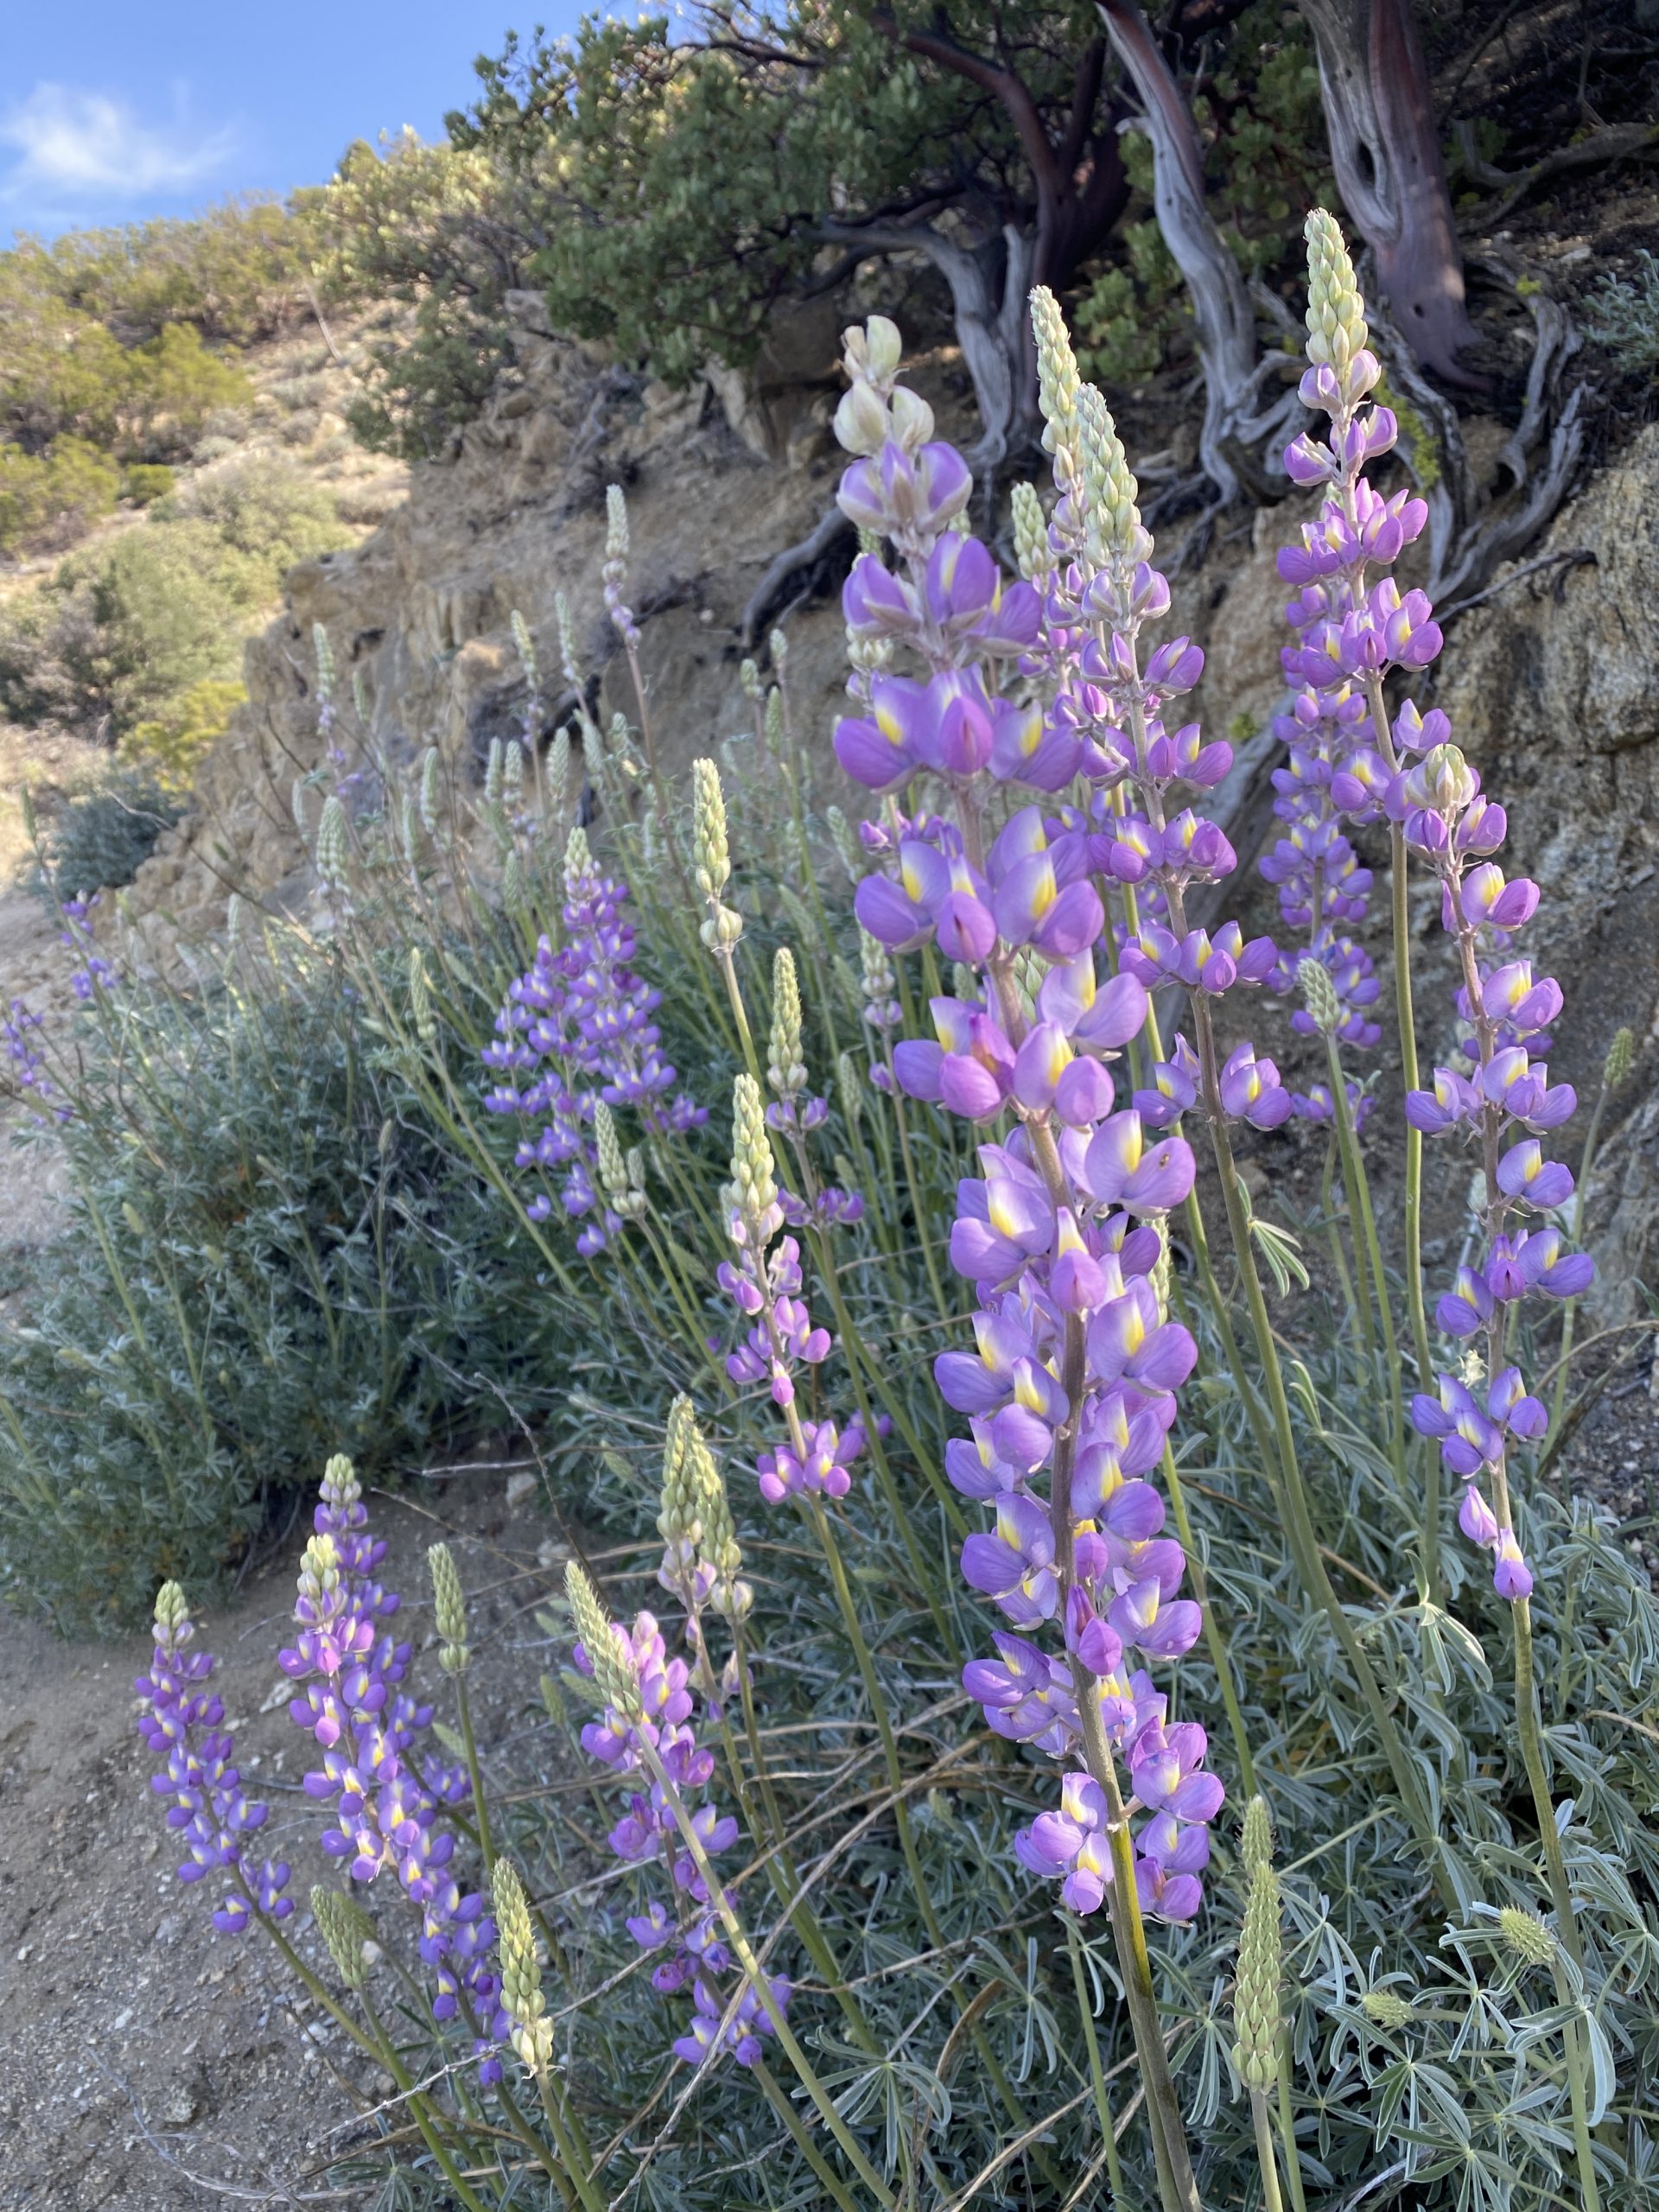 more lupines Mile 146.1 to Paradise Valley Cafe (Mile 151.8)